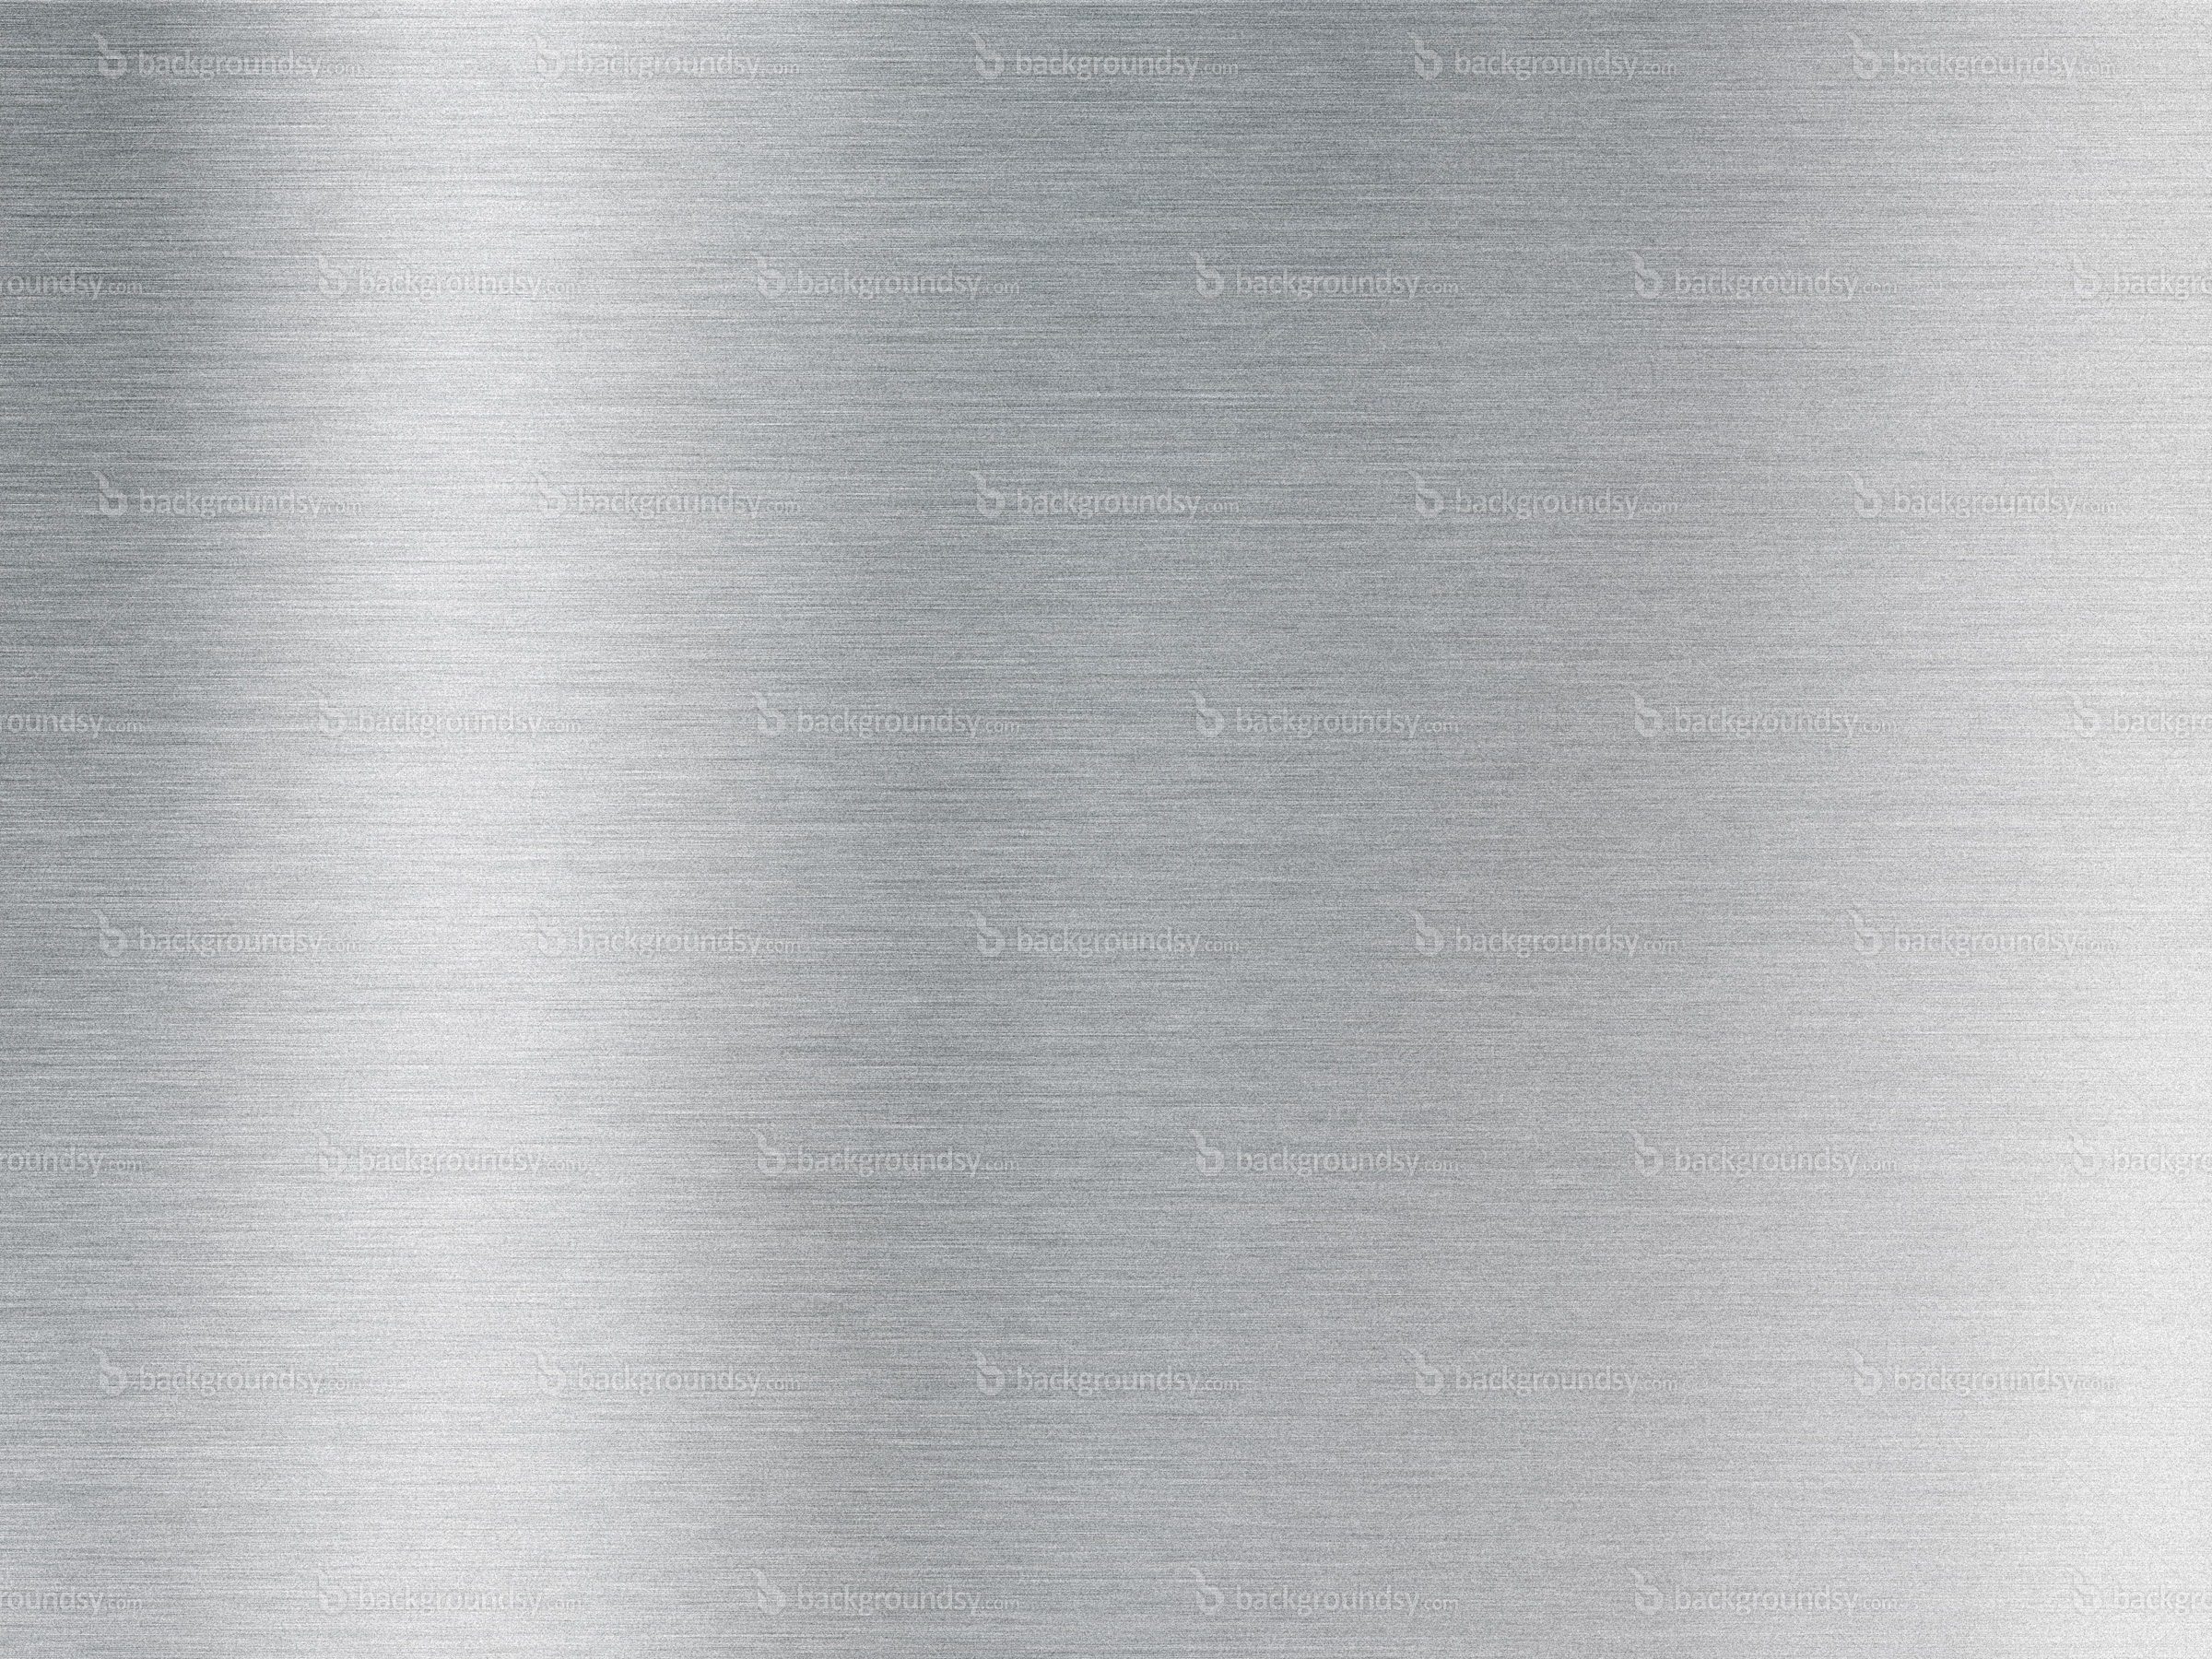 🔥 Free download Brushed Silver Metallic Background Top Pictures Gallery